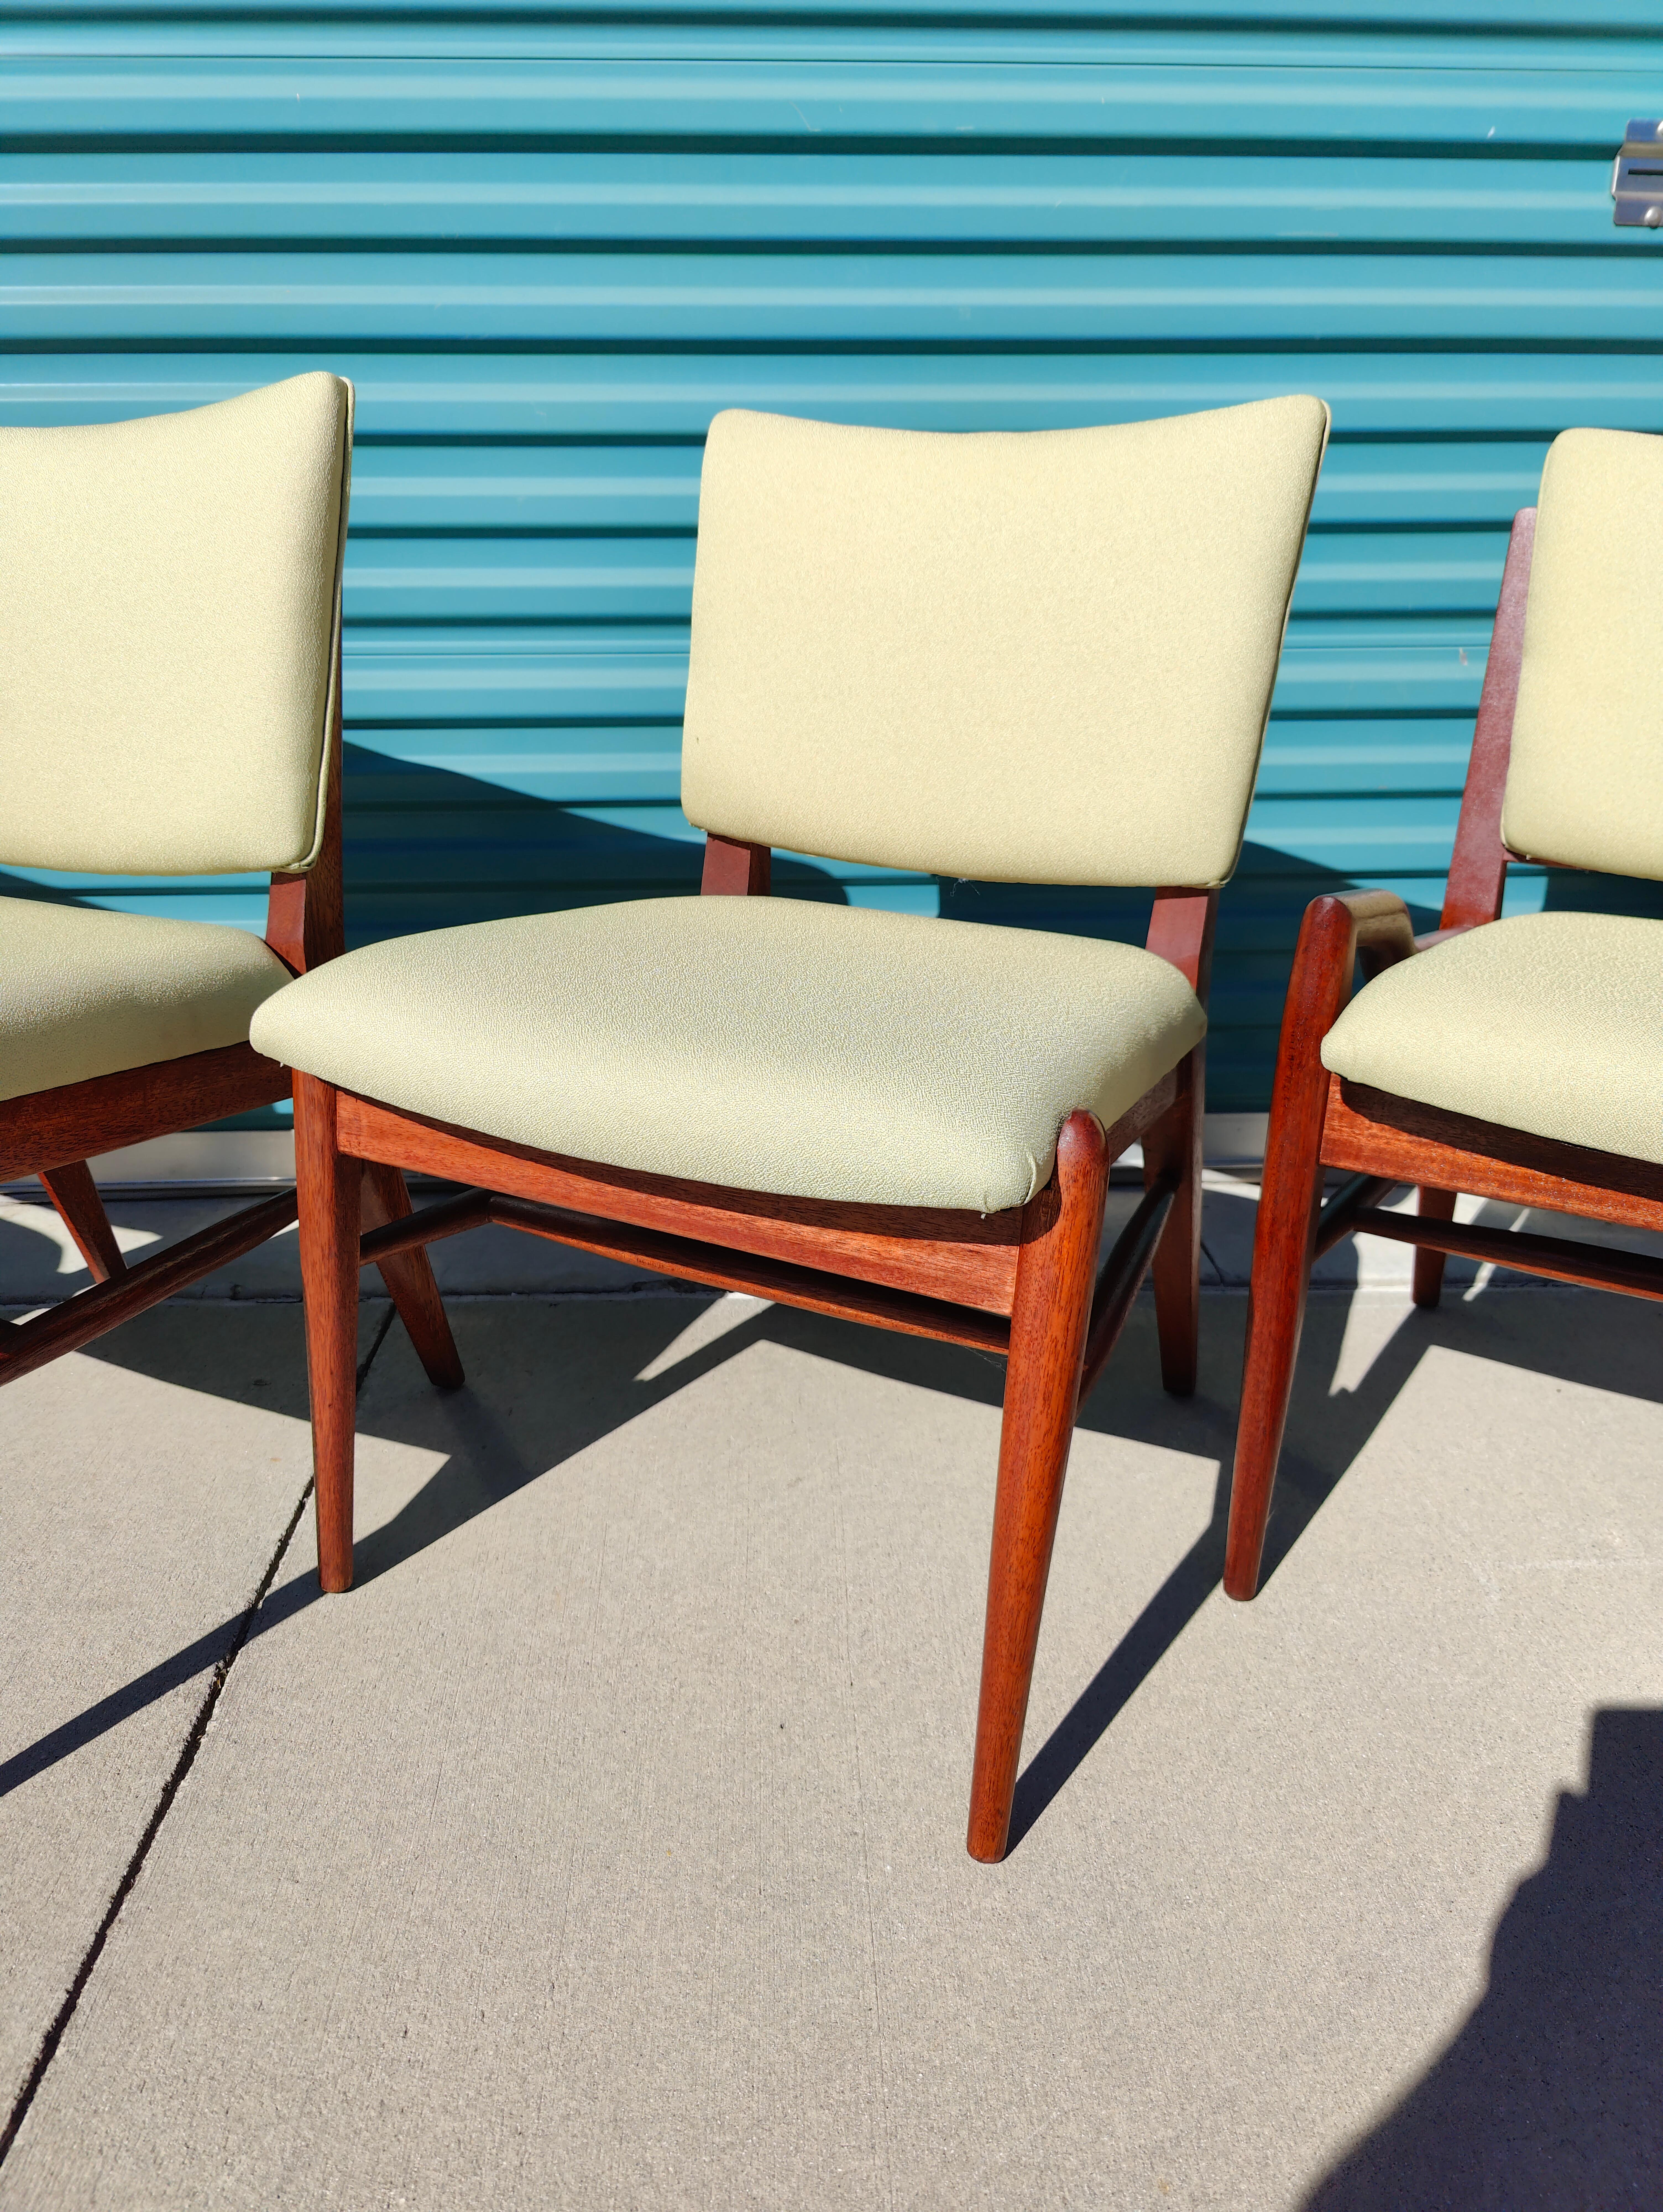 Vintage Mid-Century Modern Mahogony Chairs by Brown Saltman For Sale 7